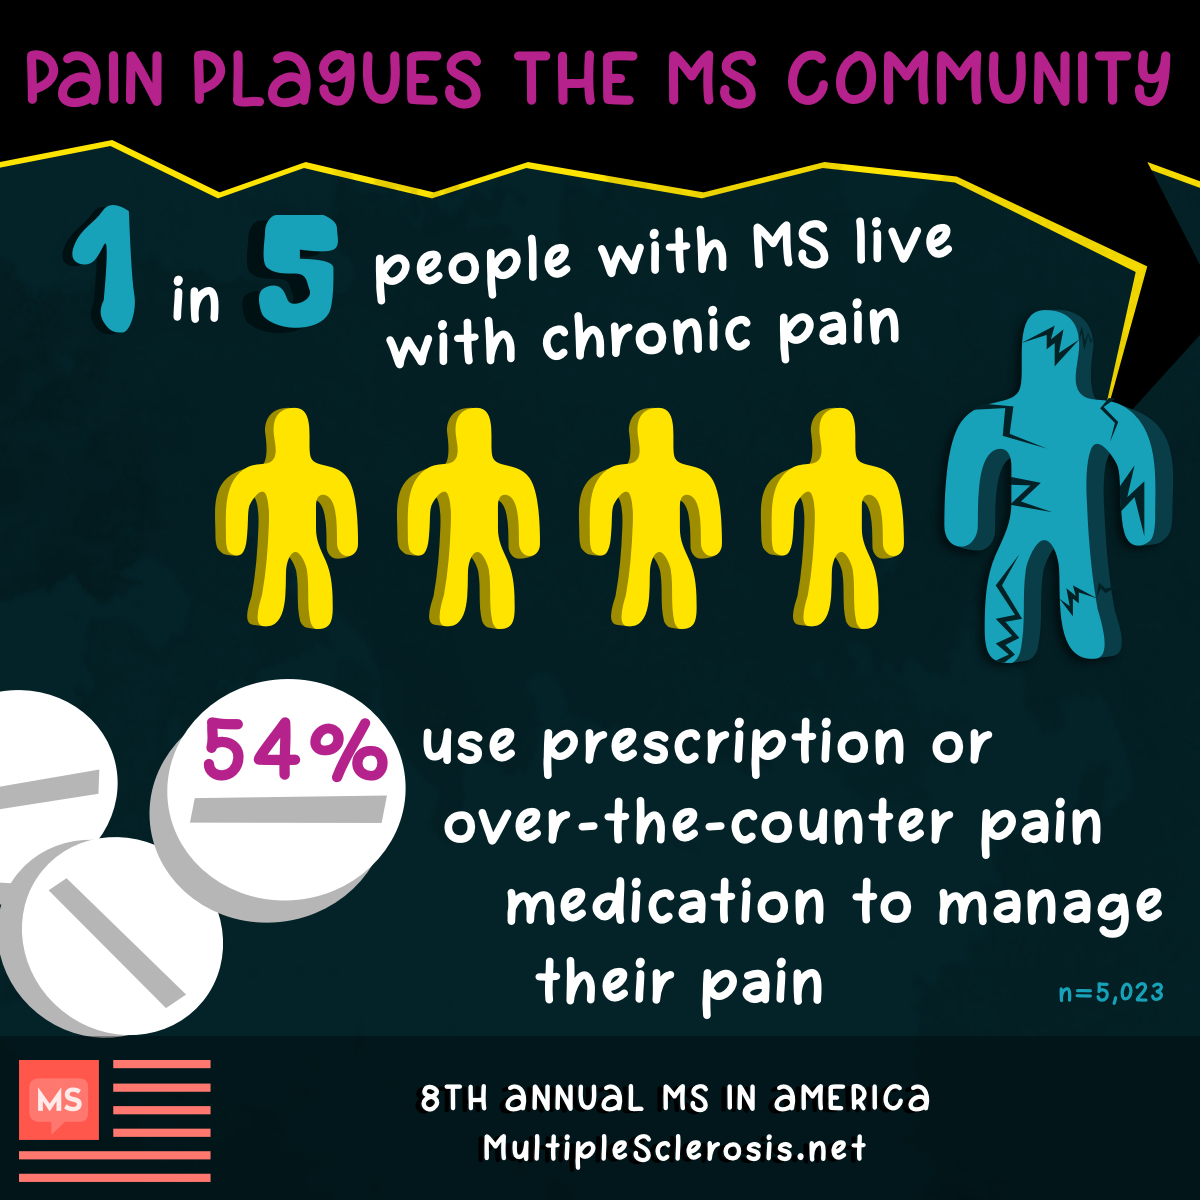 1 in 5 people with MS live with chronic pain and over half use prescription or over-the-counter medication to manage pain.